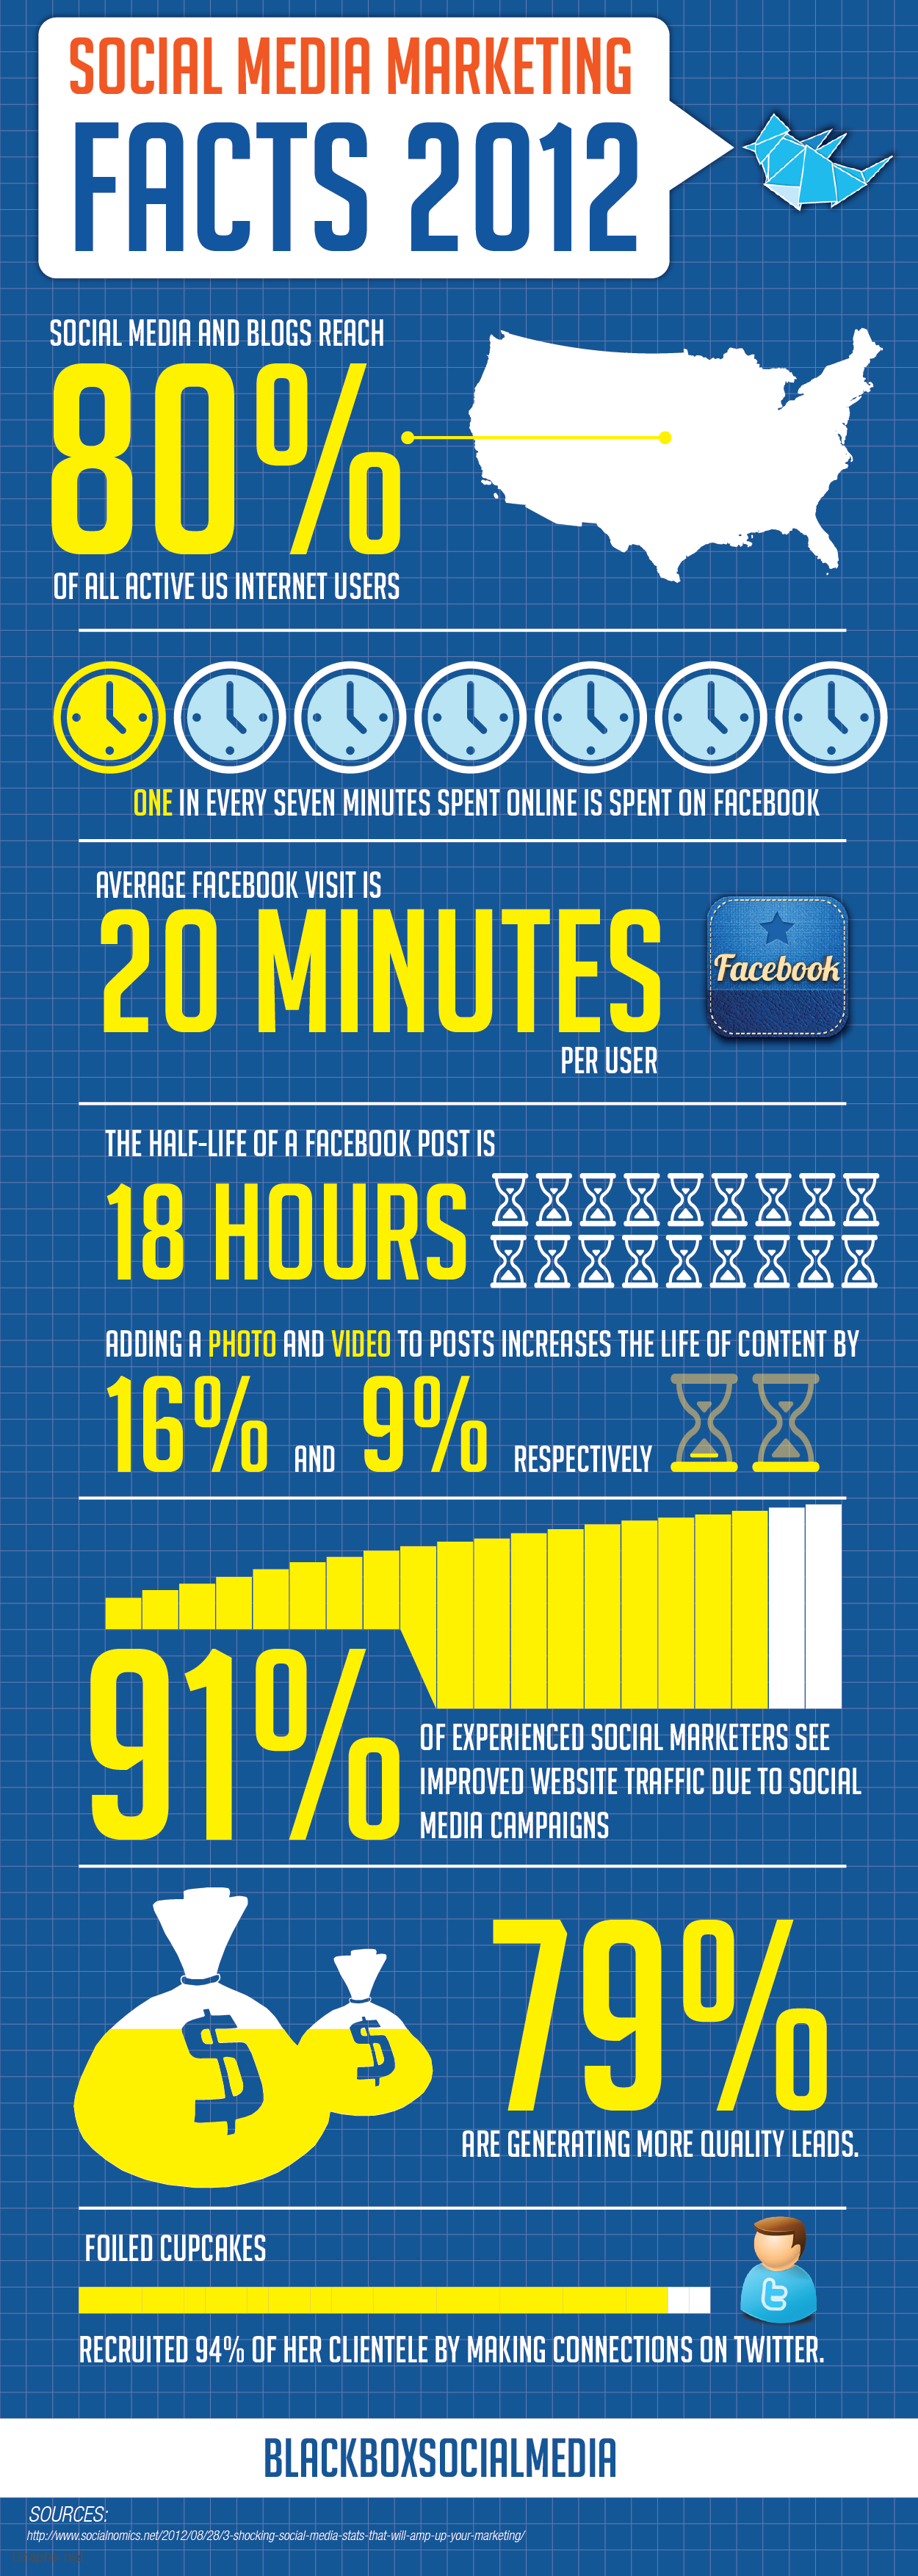 Facts about social media marketing